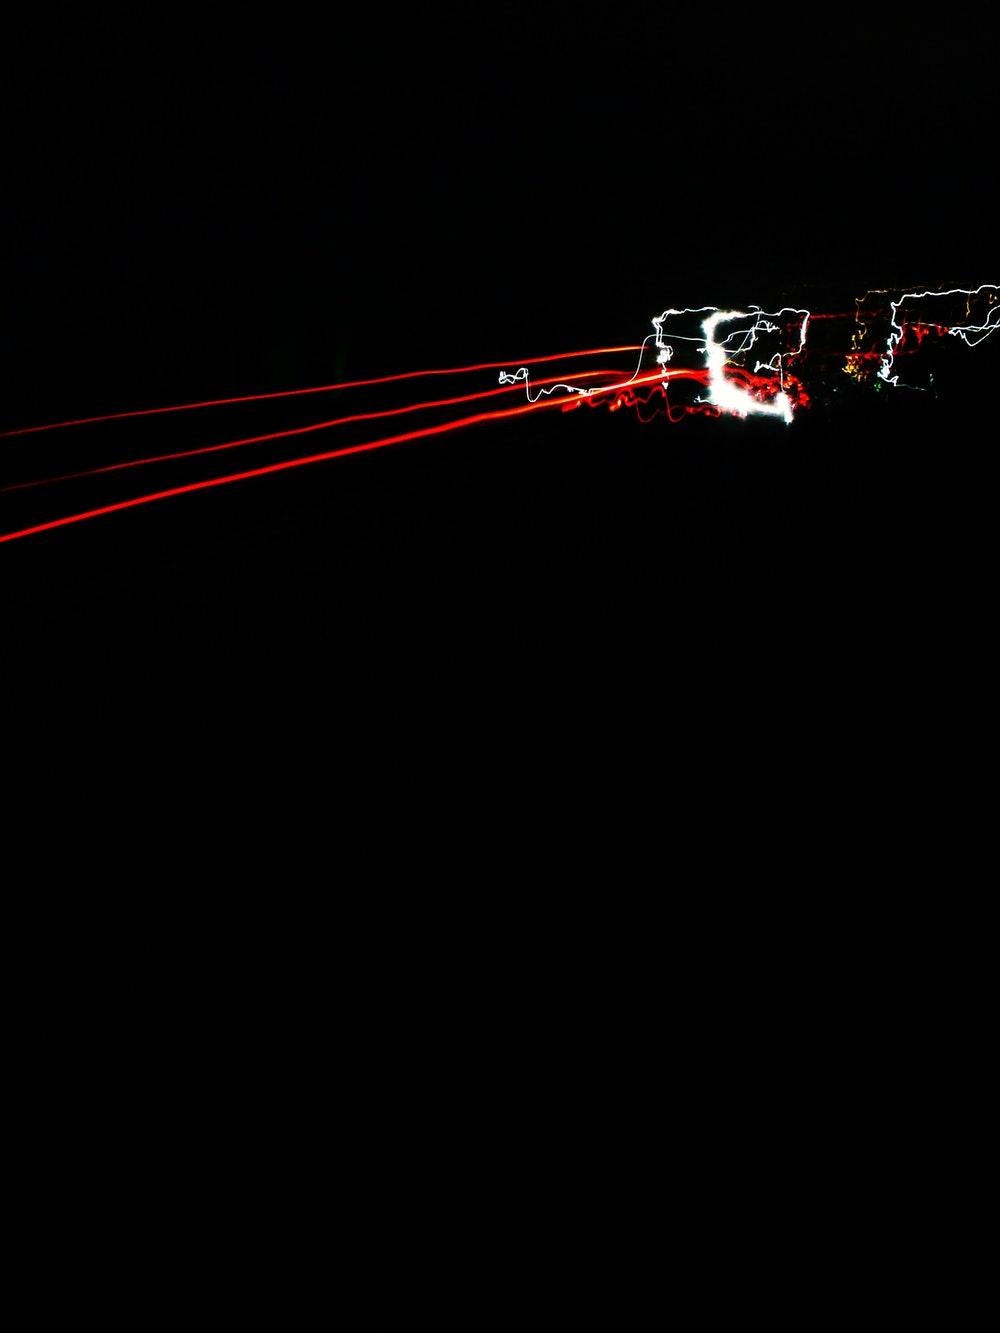 Laser Light Picture. Download Free Image